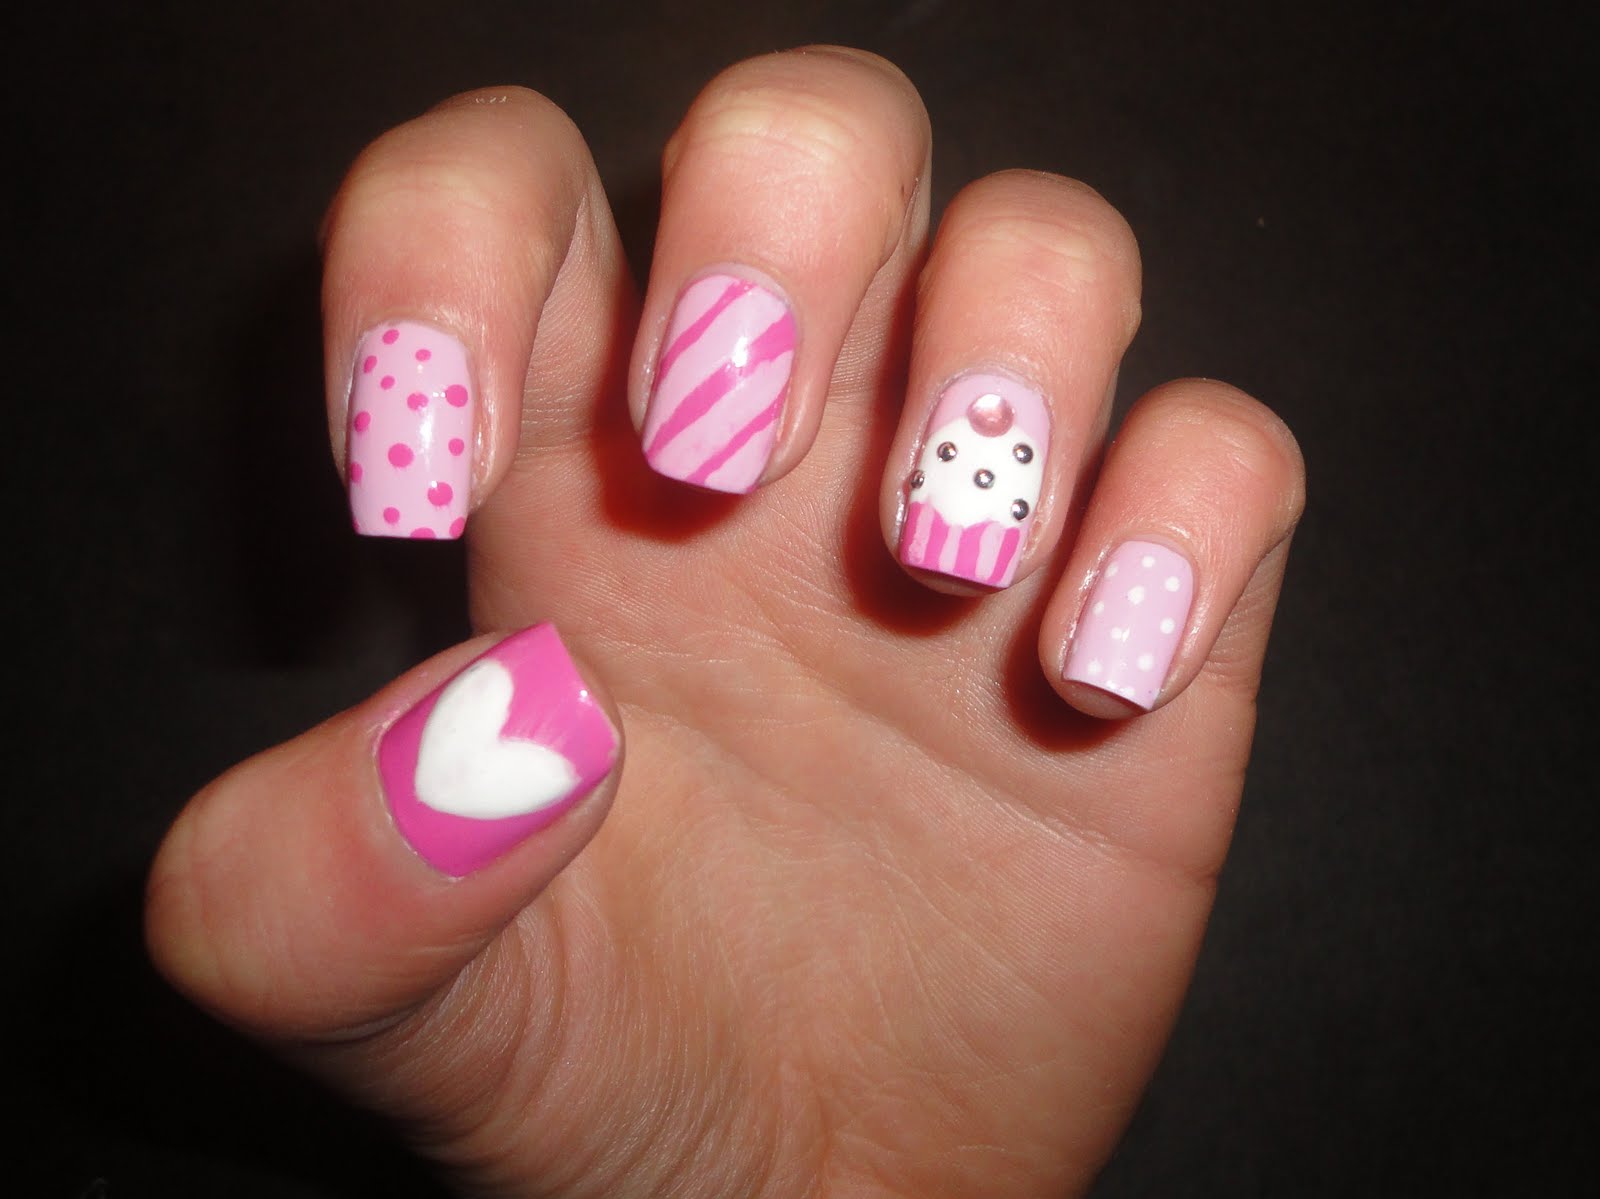 2. Cute and Simple Love Nail Designs - wide 2